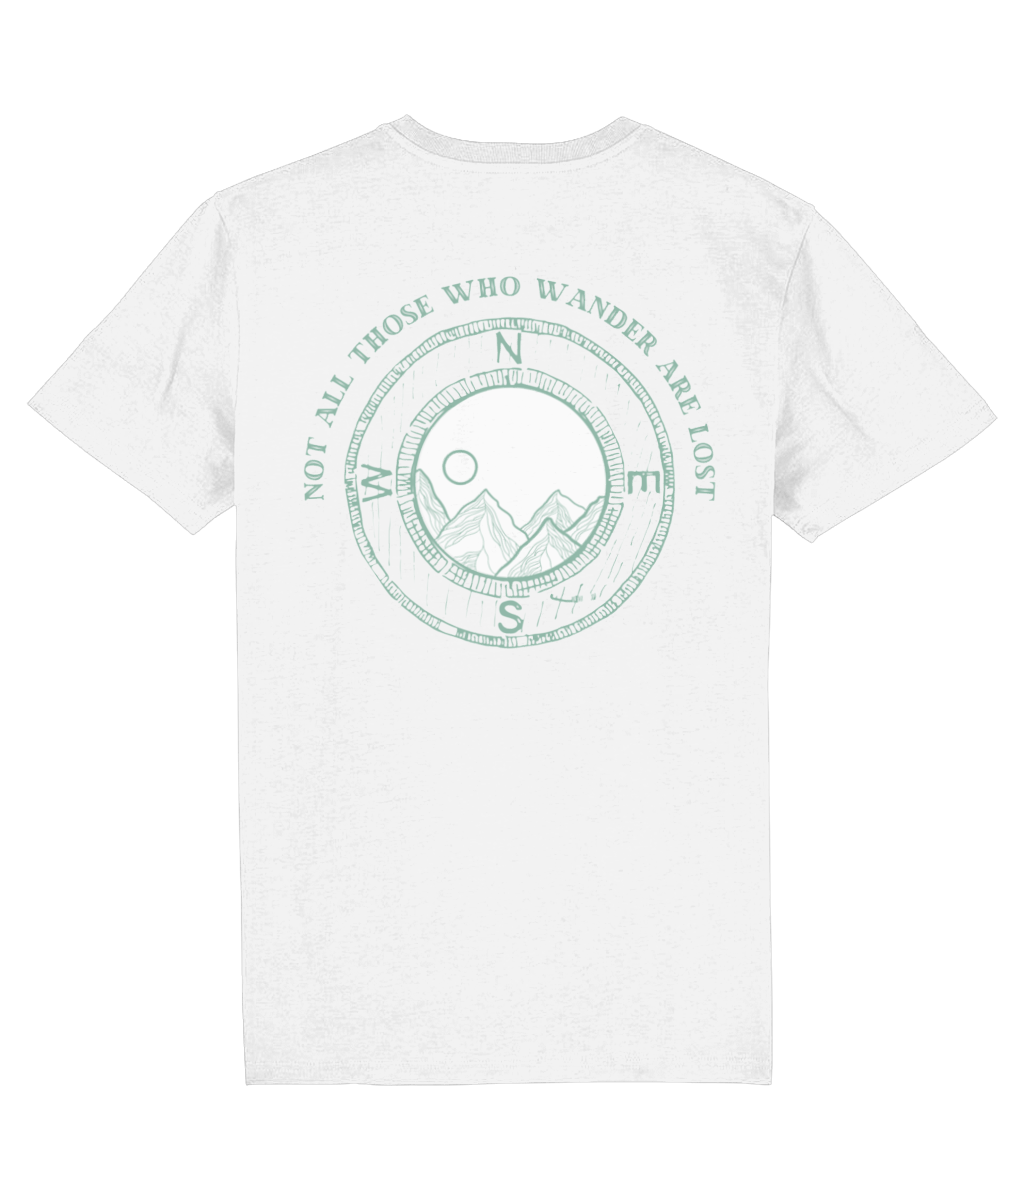 Not All Those Who Wander Are Lost Unisex Organic Cotton T-shirt